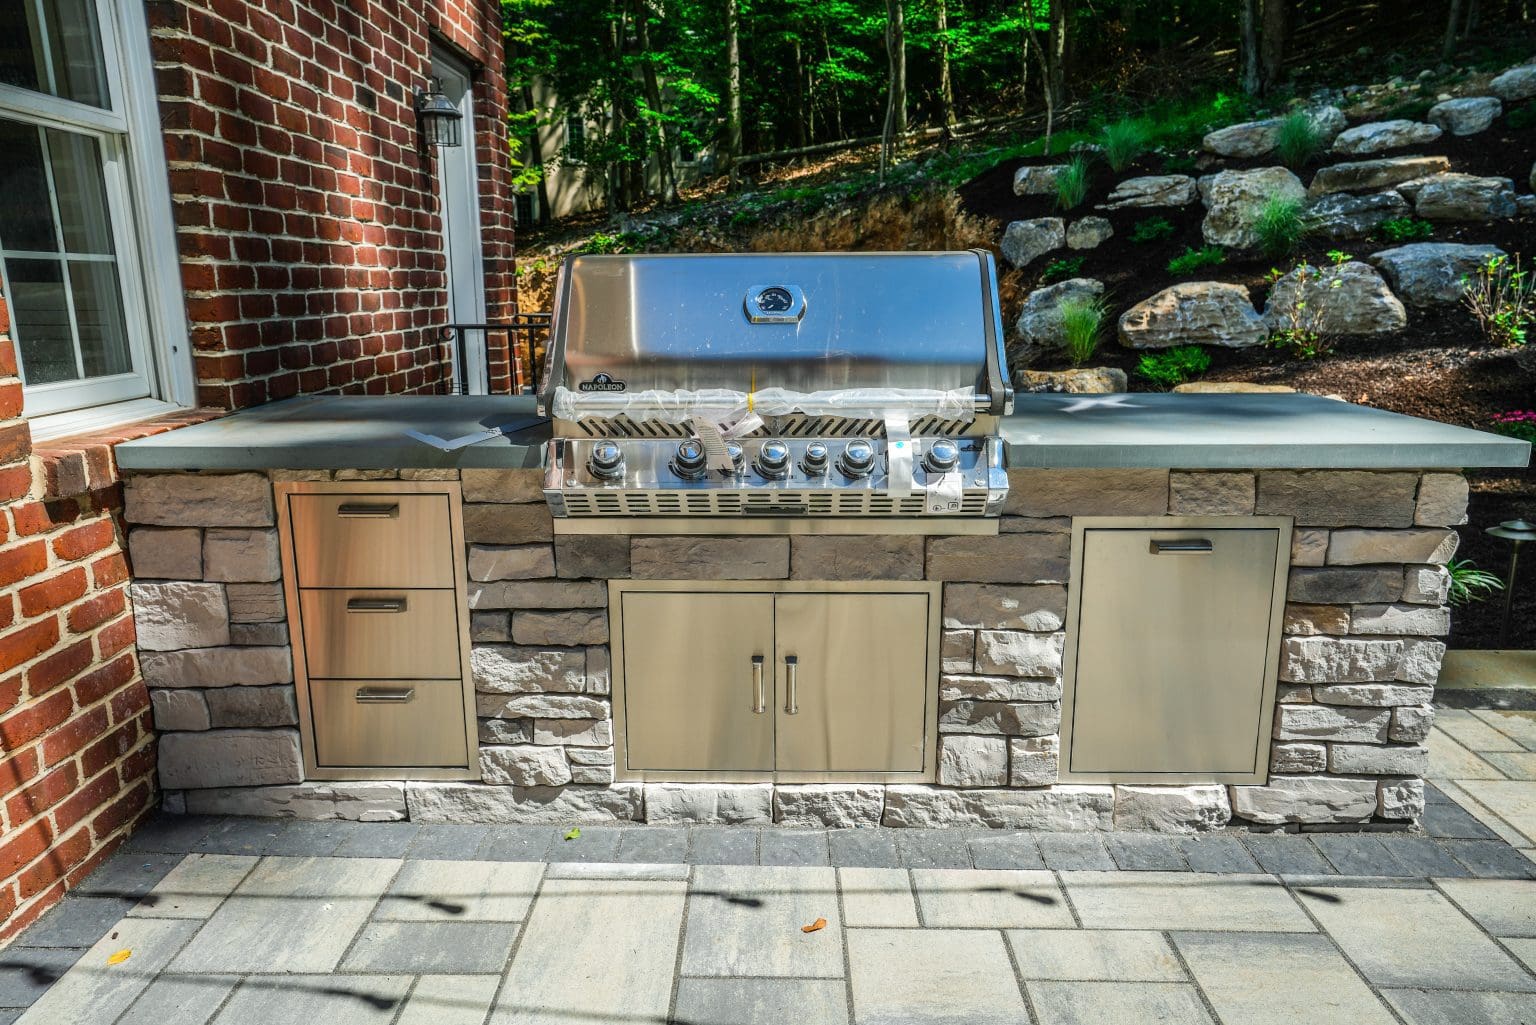 A landscape design featuring an outdoor kitchen with a grill and sink.